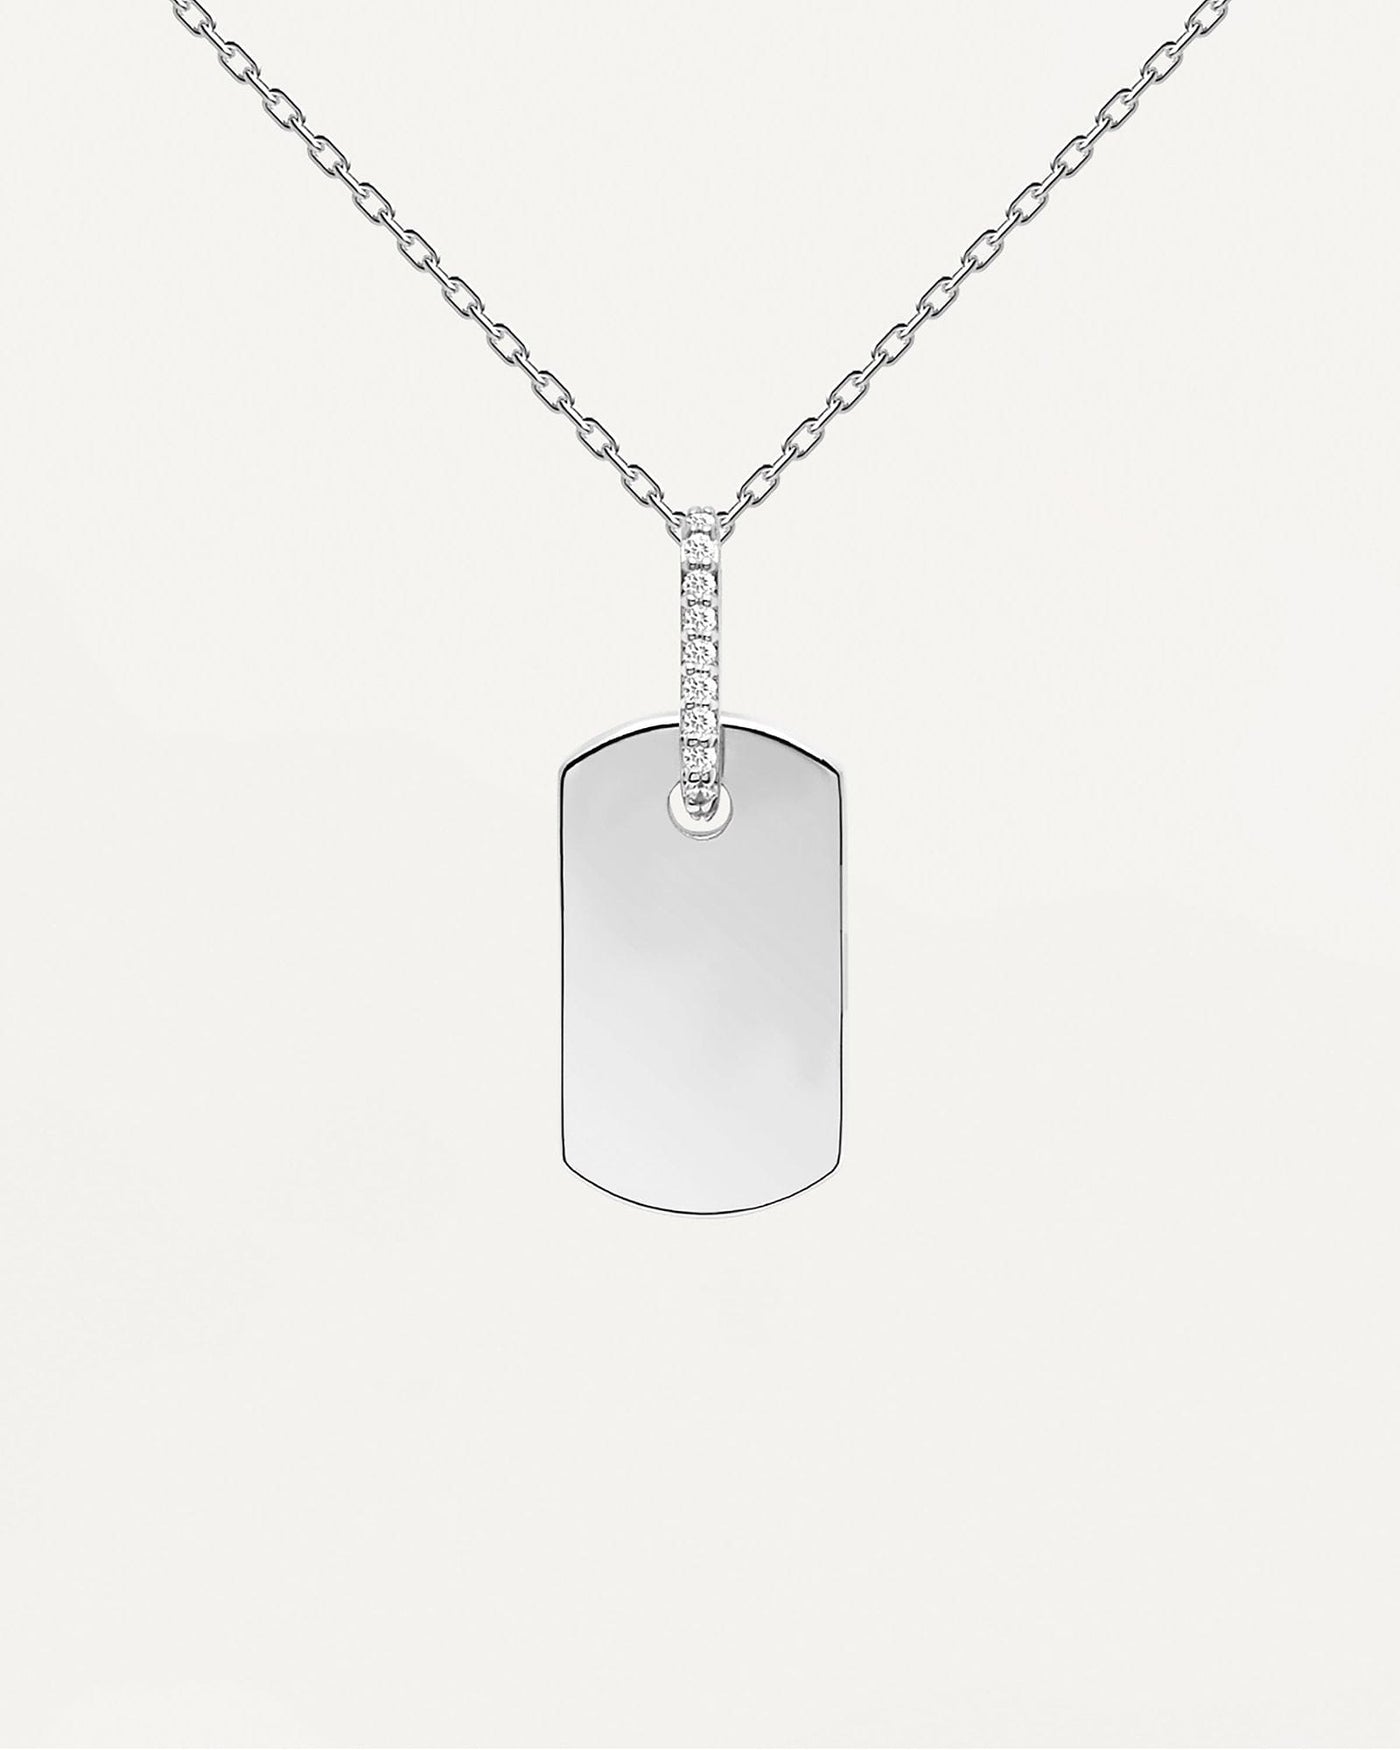 2024 Selection | Talisman Silver Necklace. Personalized necklace in sterling silver with engravable plate hanging from white zirconia. Get the latest arrival from PDPAOLA. Place your order safely and get this Best Seller. Free Shipping.